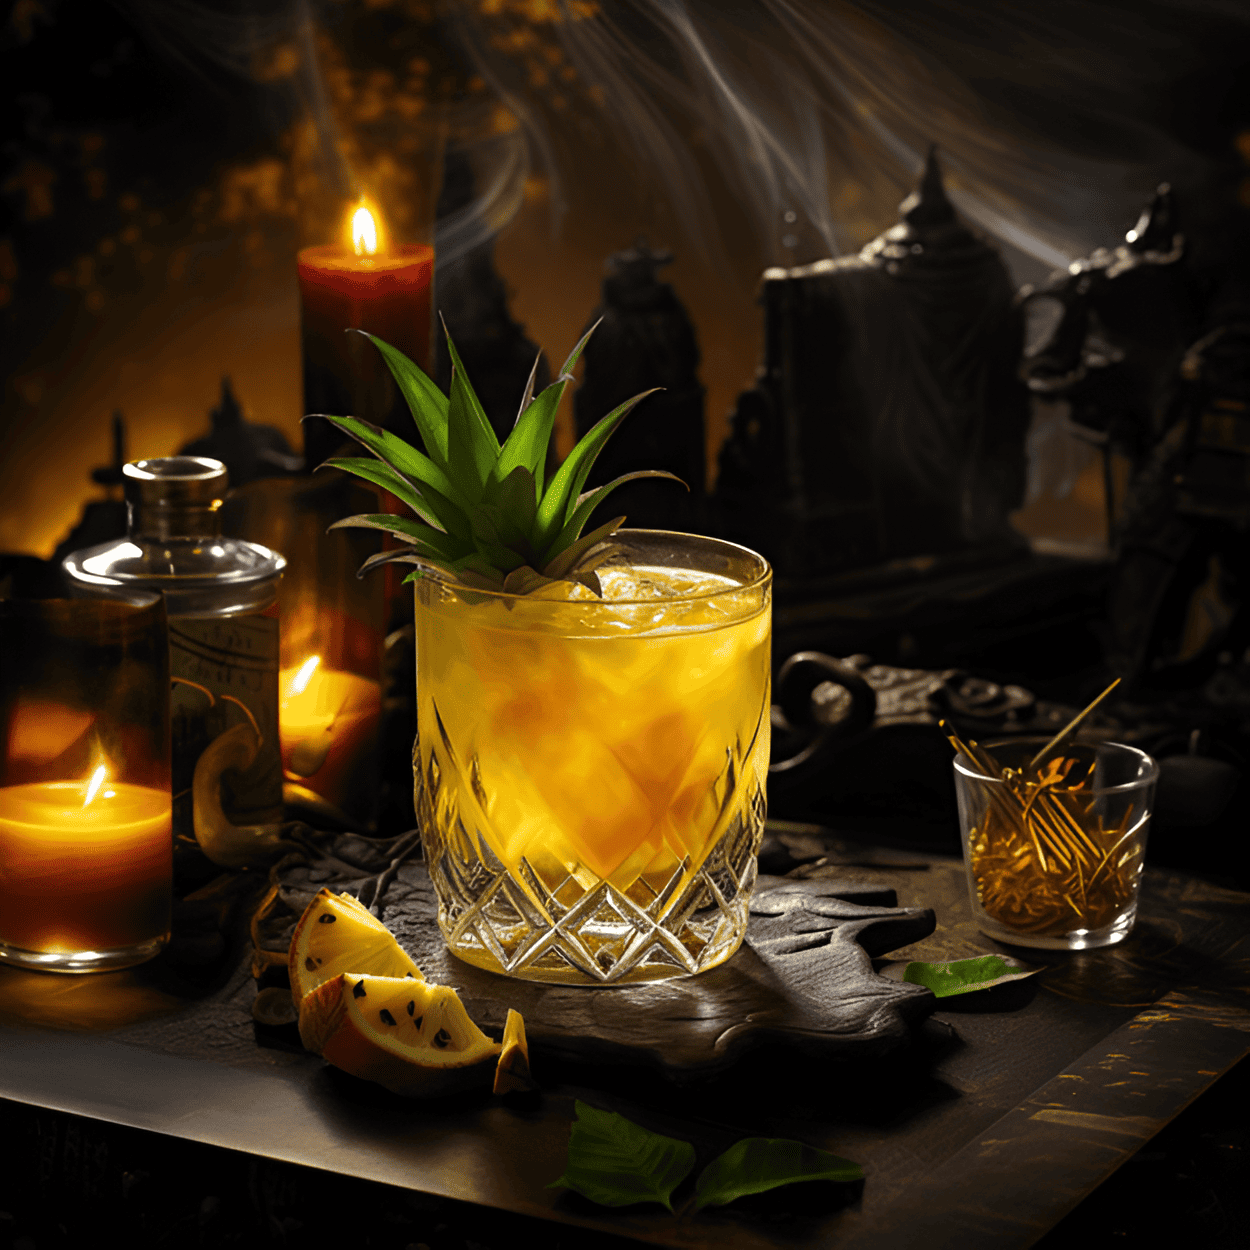 Xanadu Cocktail Recipe - The Xanadu cocktail is a harmonious blend of sweet, sour, and fruity flavors, with a hint of spice. The combination of tropical fruits and exotic spices creates a unique and refreshing taste that is both bold and delicate.